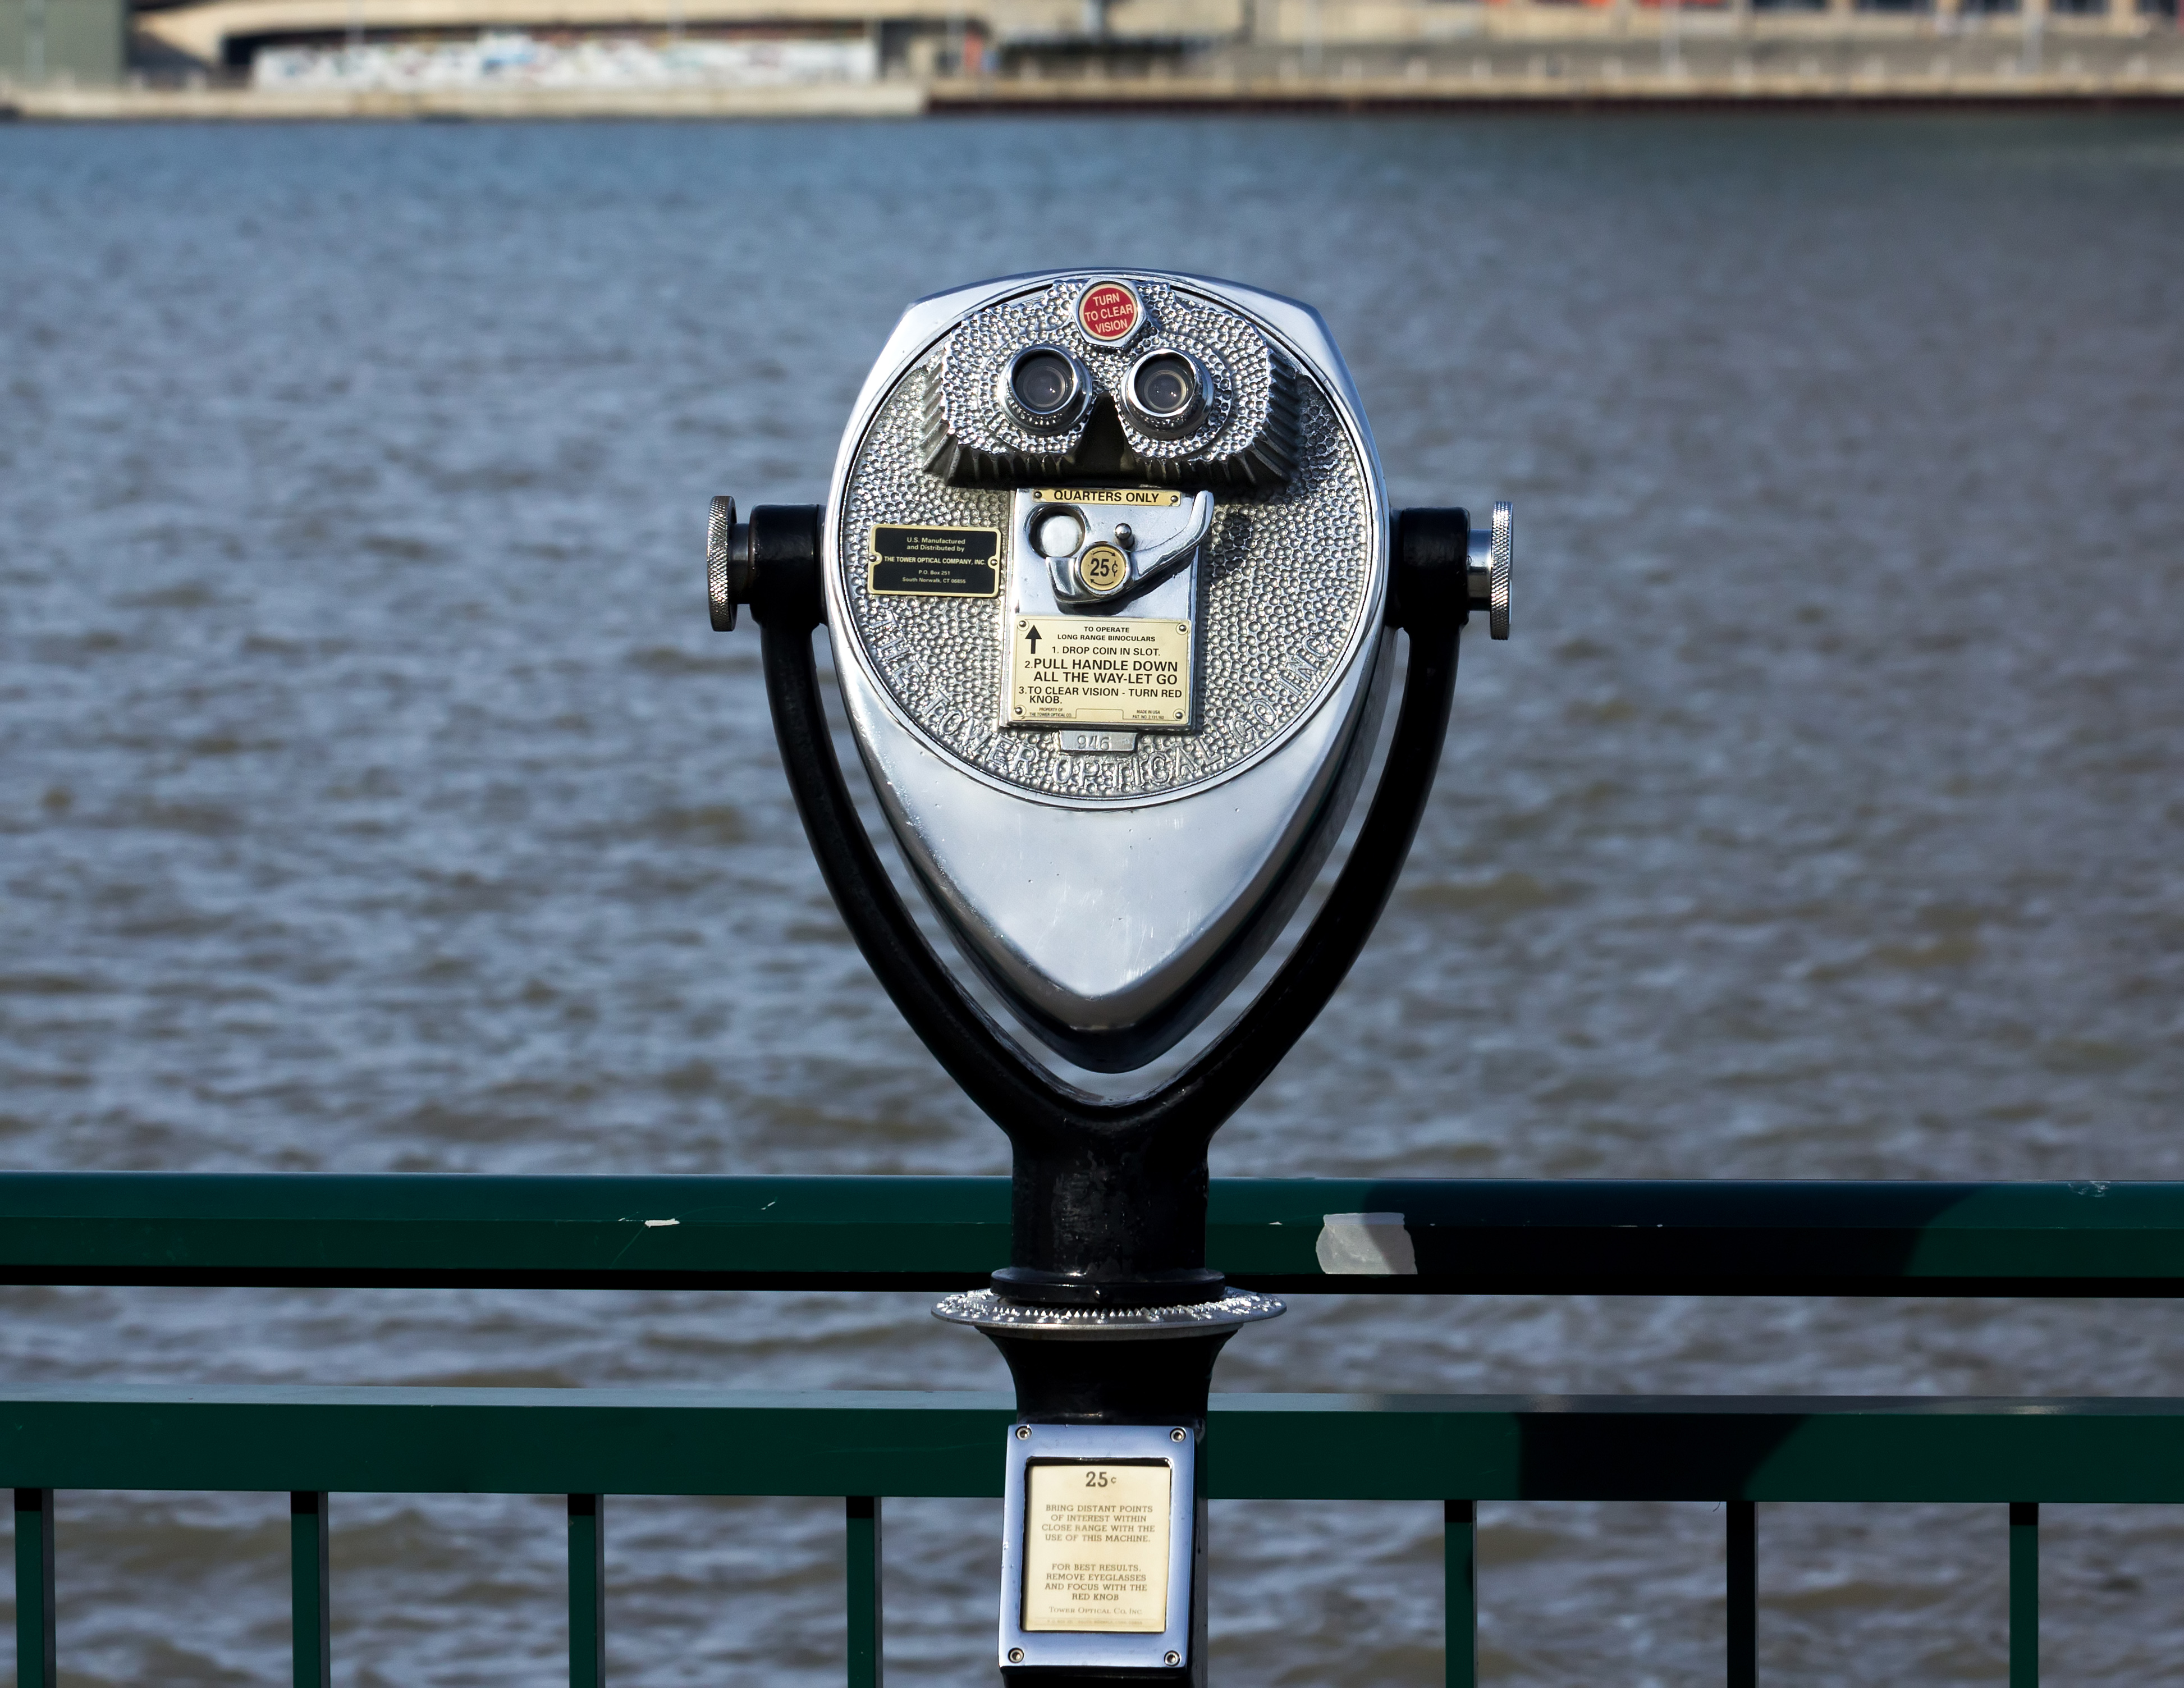 Tower viewer, Windsor city waterfront, 2014-12-07